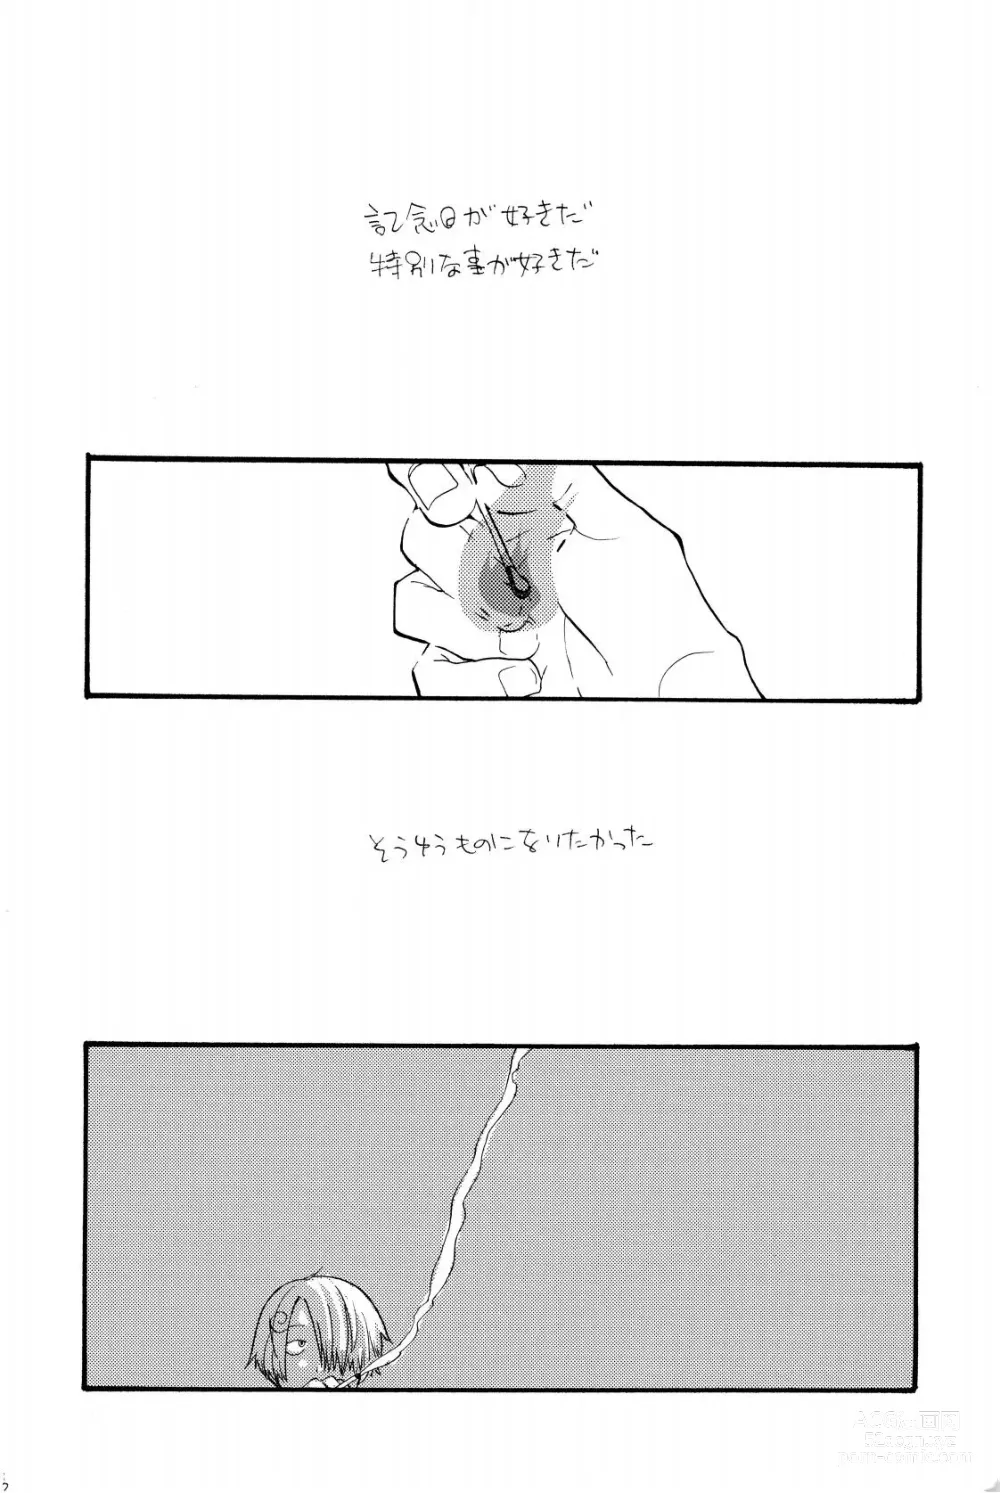 Page 5 of doujinshi 315569261second